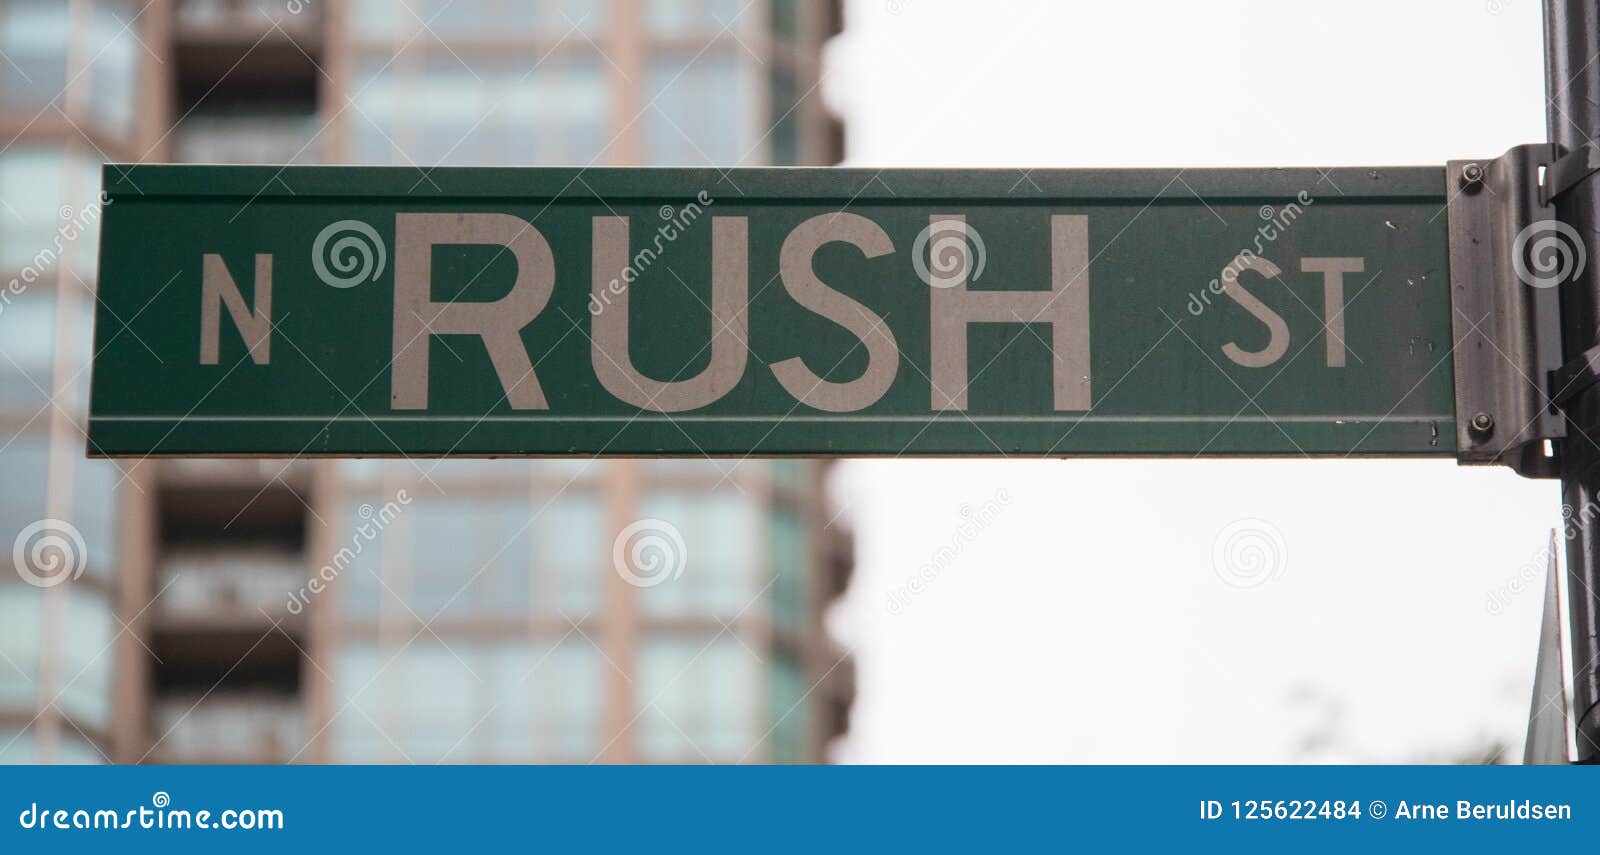 rush street sign in chicago